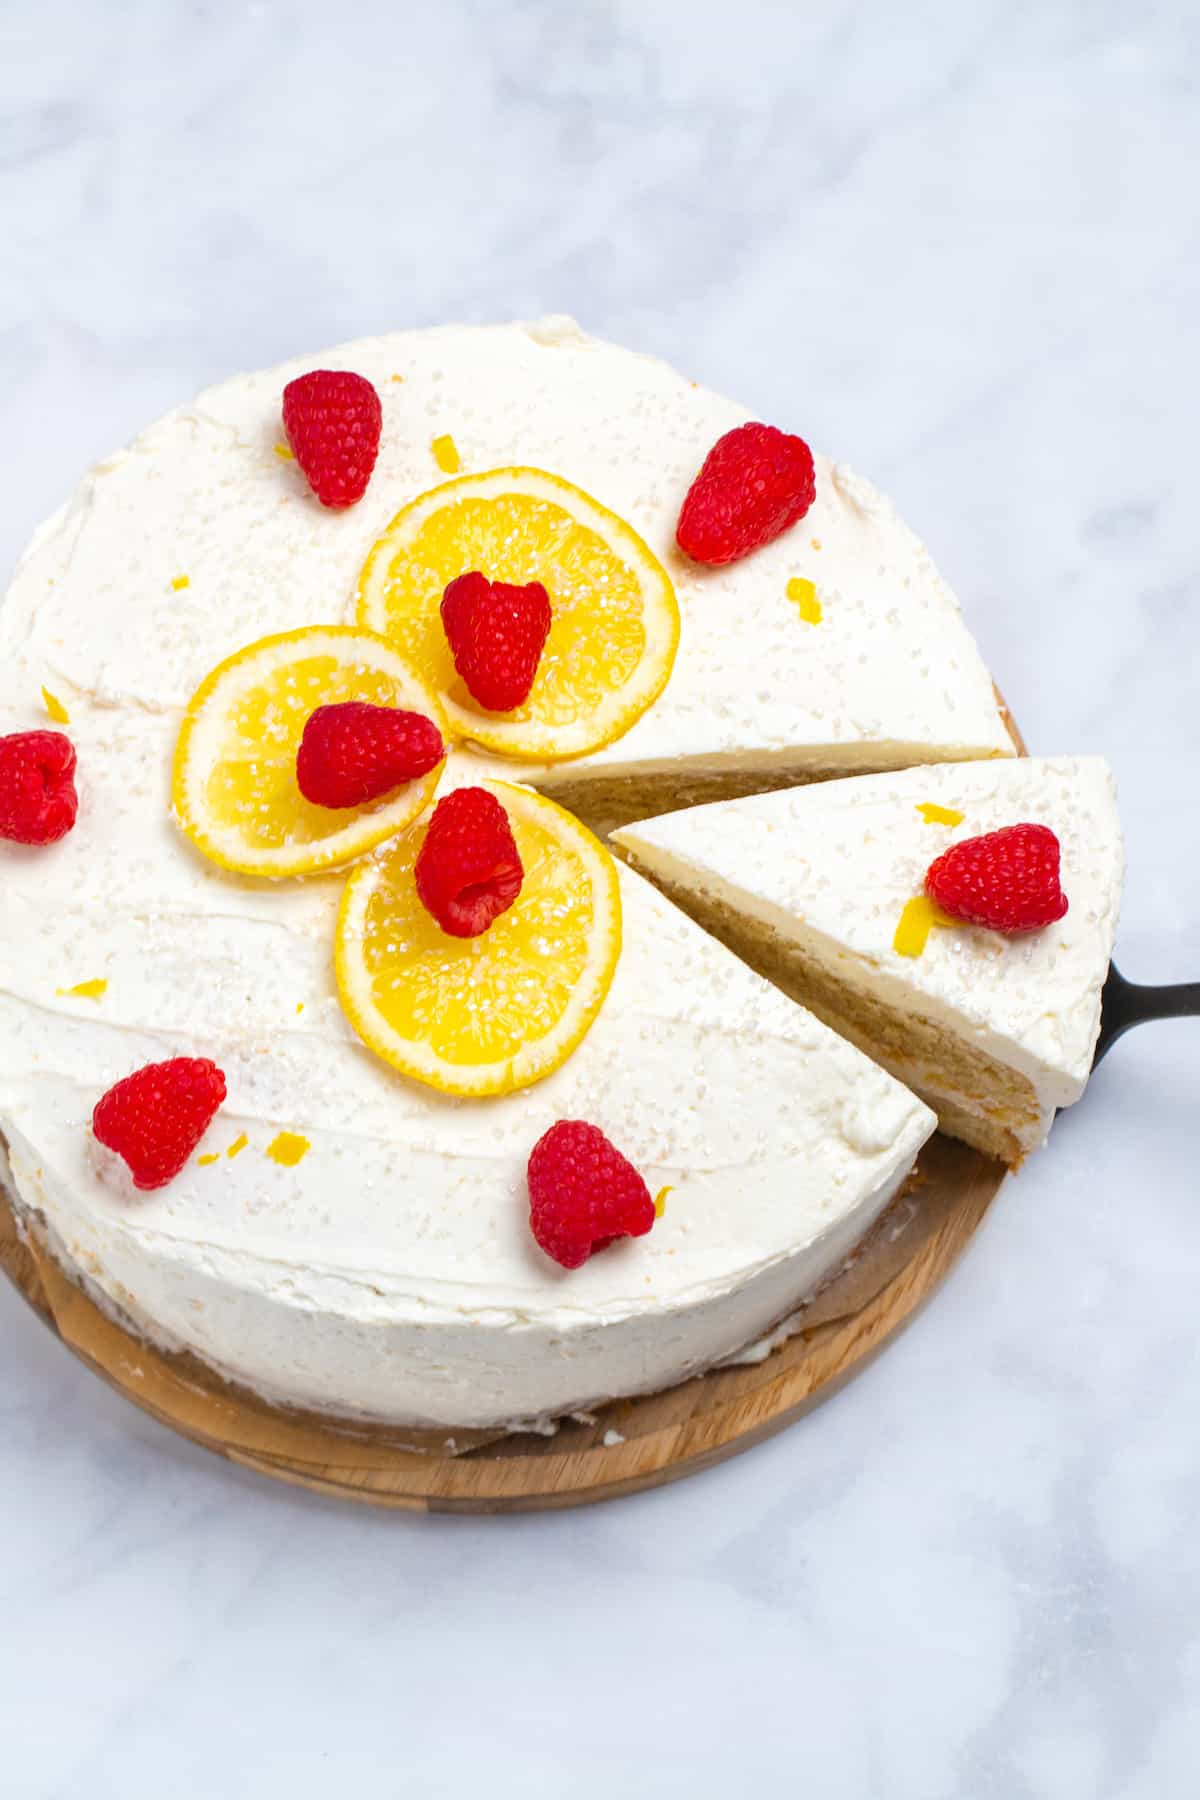 A lemon cake topped with lemon slices, sprinkles, and raspberries on a wooden cake stand, with a slice being lifted out of it.